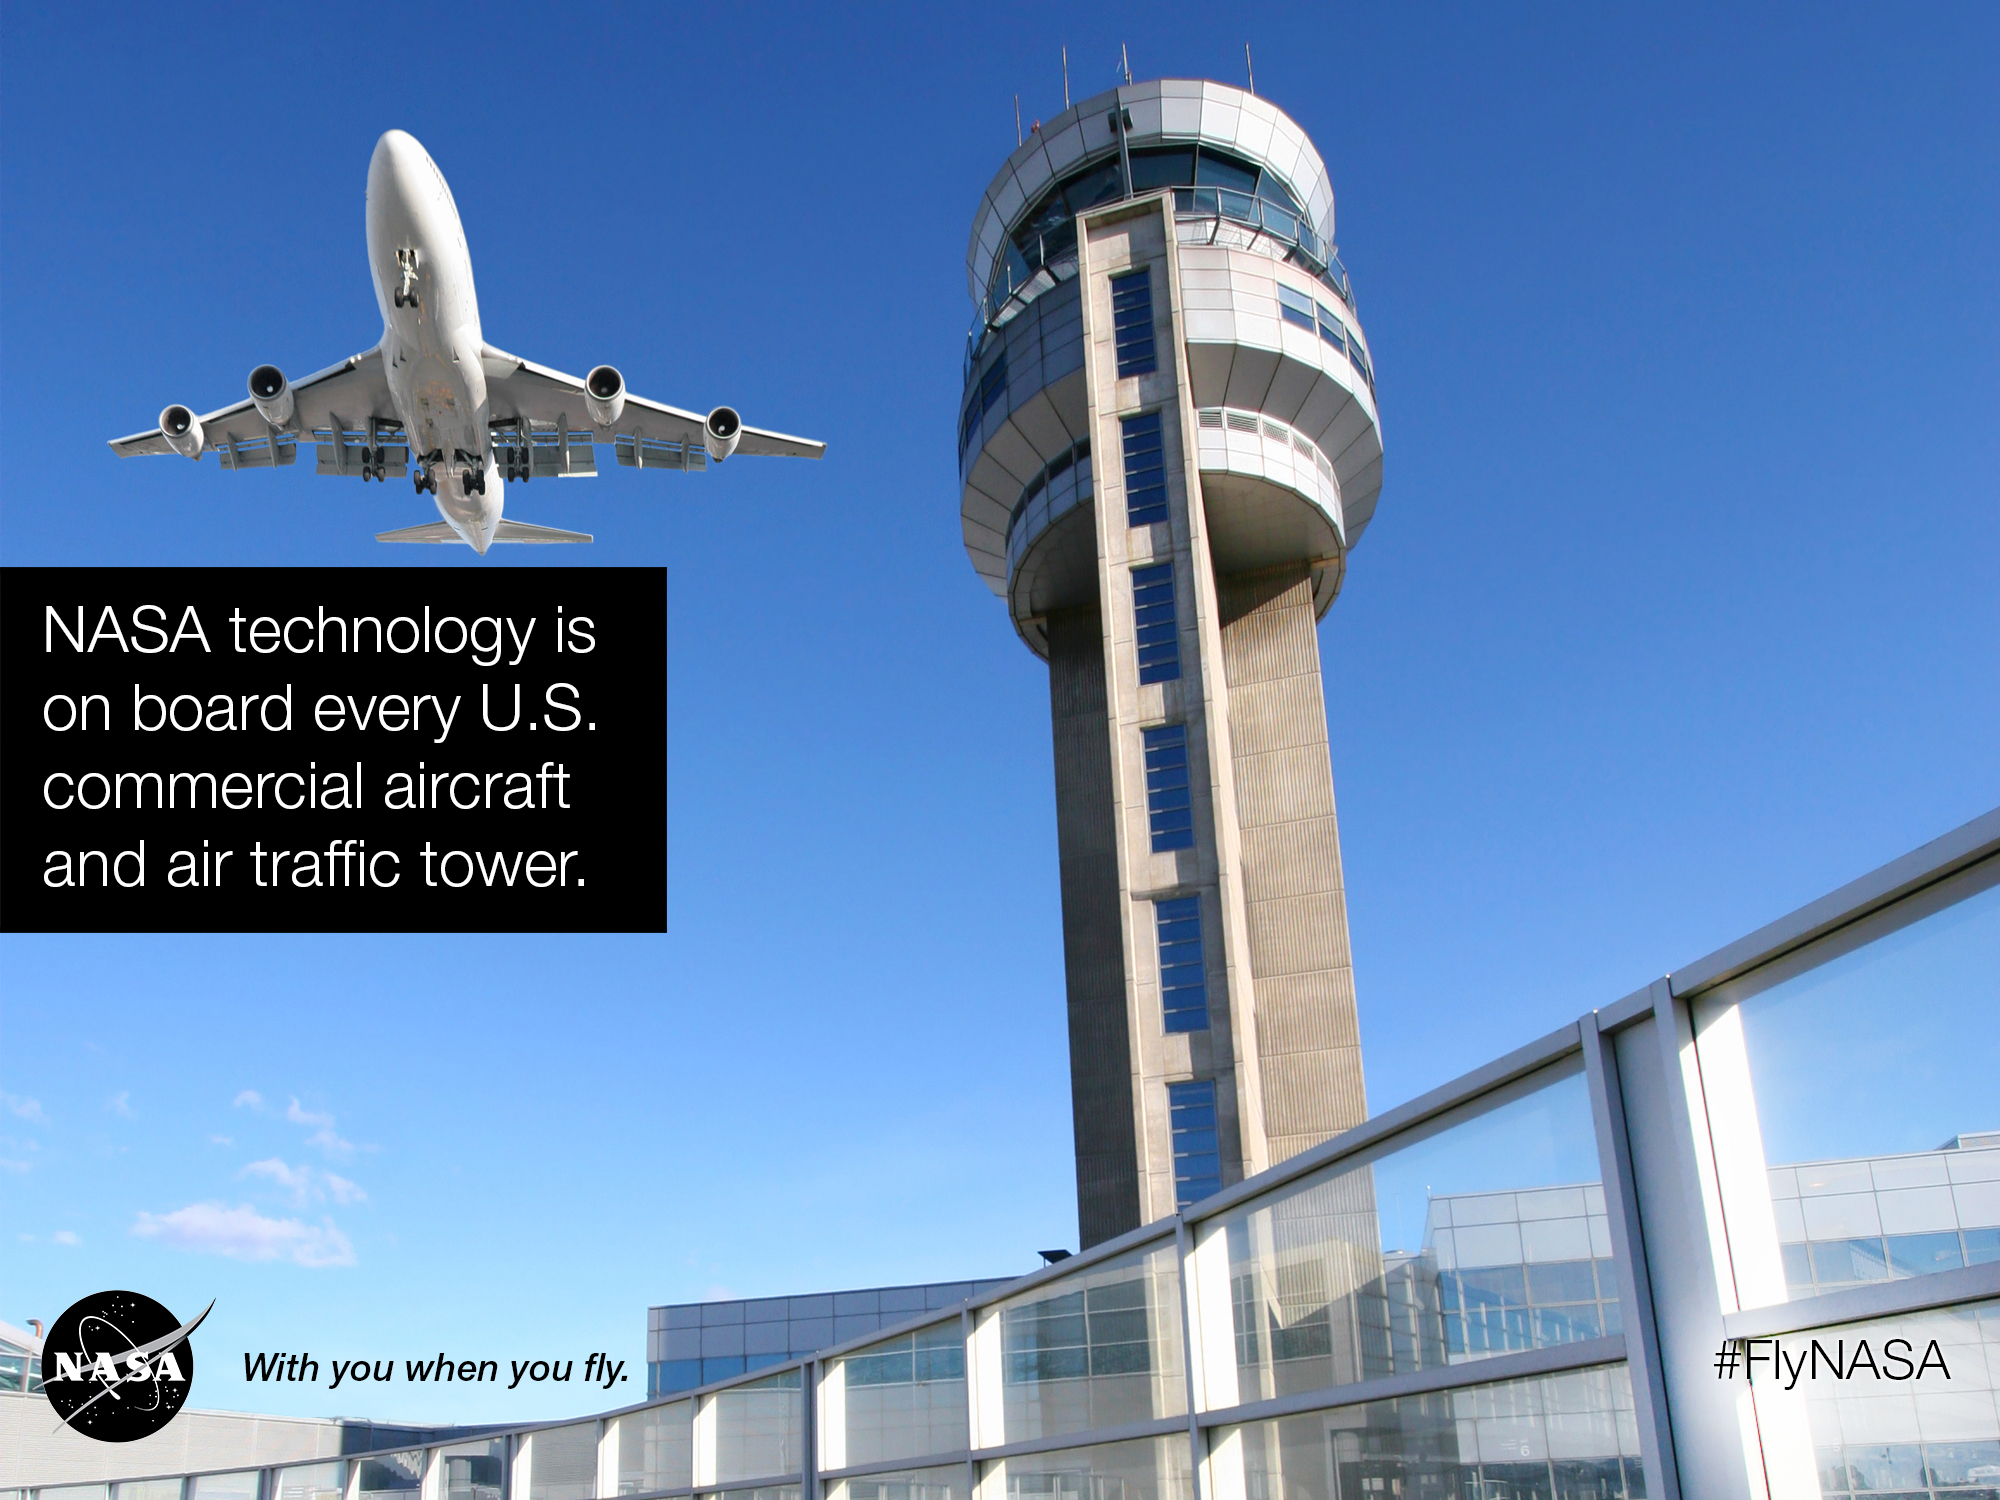 NASA technology is onboard every US Commercial Aircraft and Control Tower.